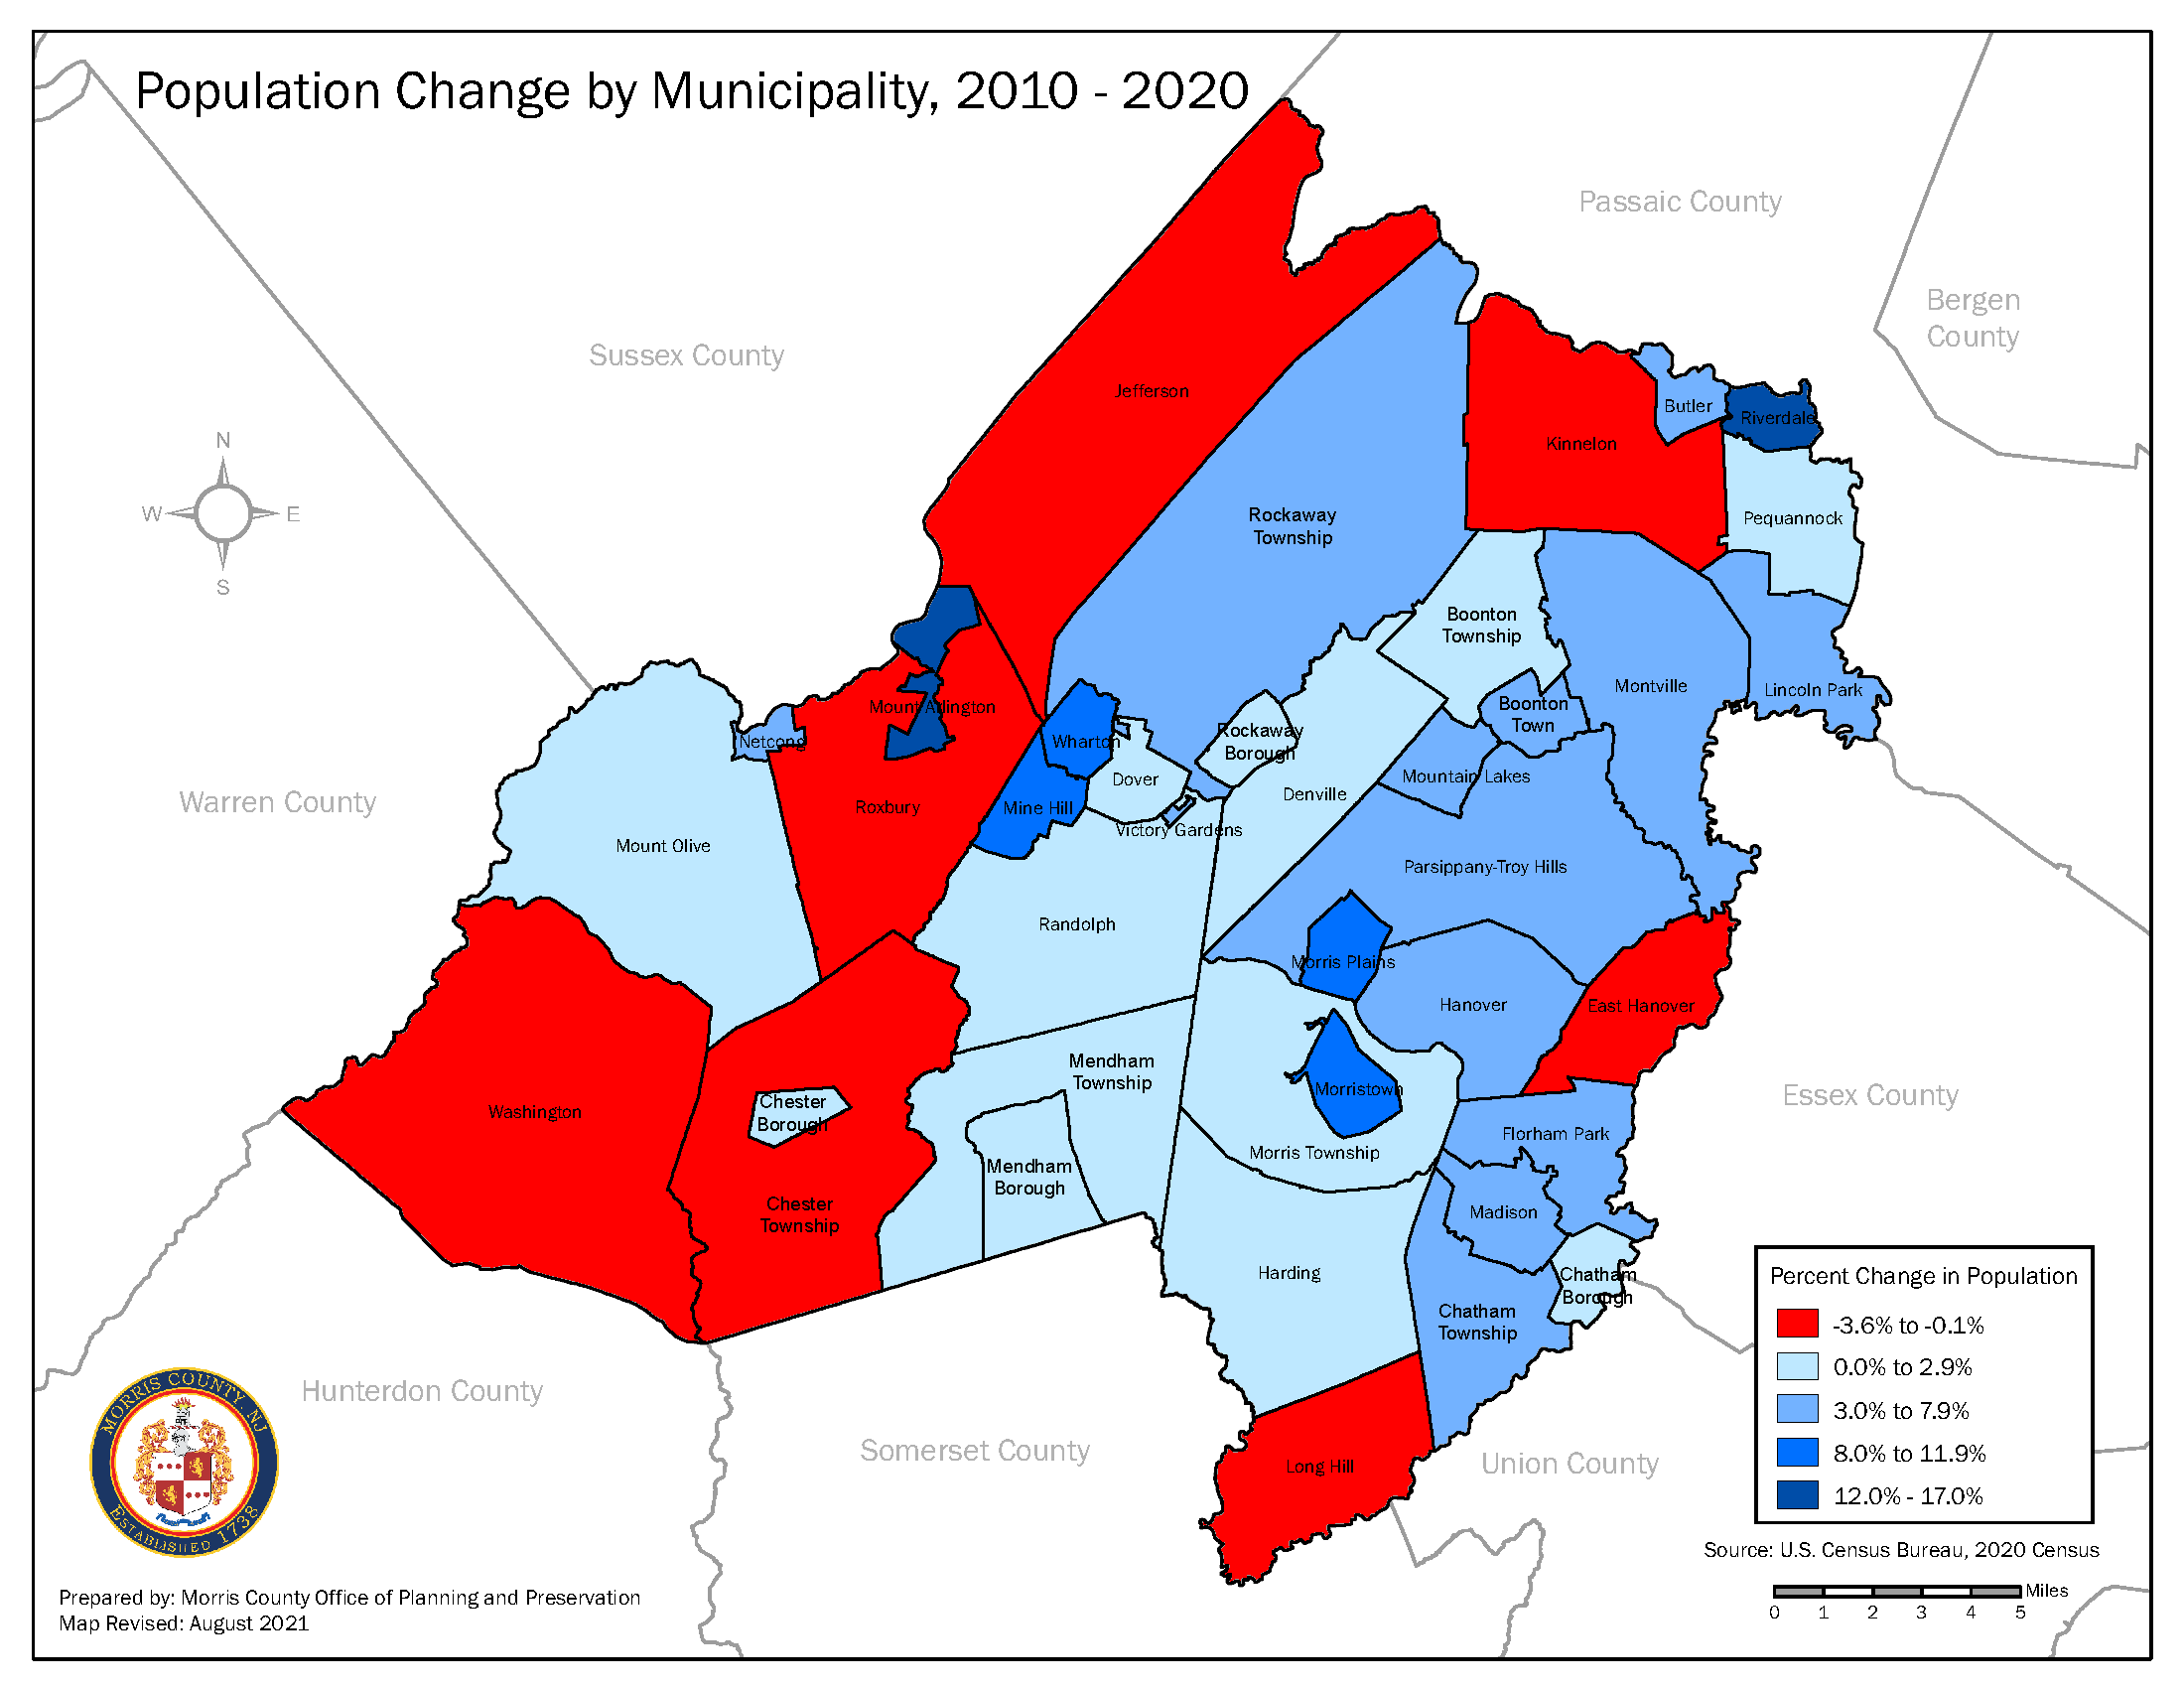 Population change by Municipality, 2010-2020. Morristown, Morris Plains, Wharton, Mine Hill all saw over 12% growth. Jefferson, Roxbury, Washington, Chester Twp, Long Hill, East Hanover and Kinnelon all lost population.